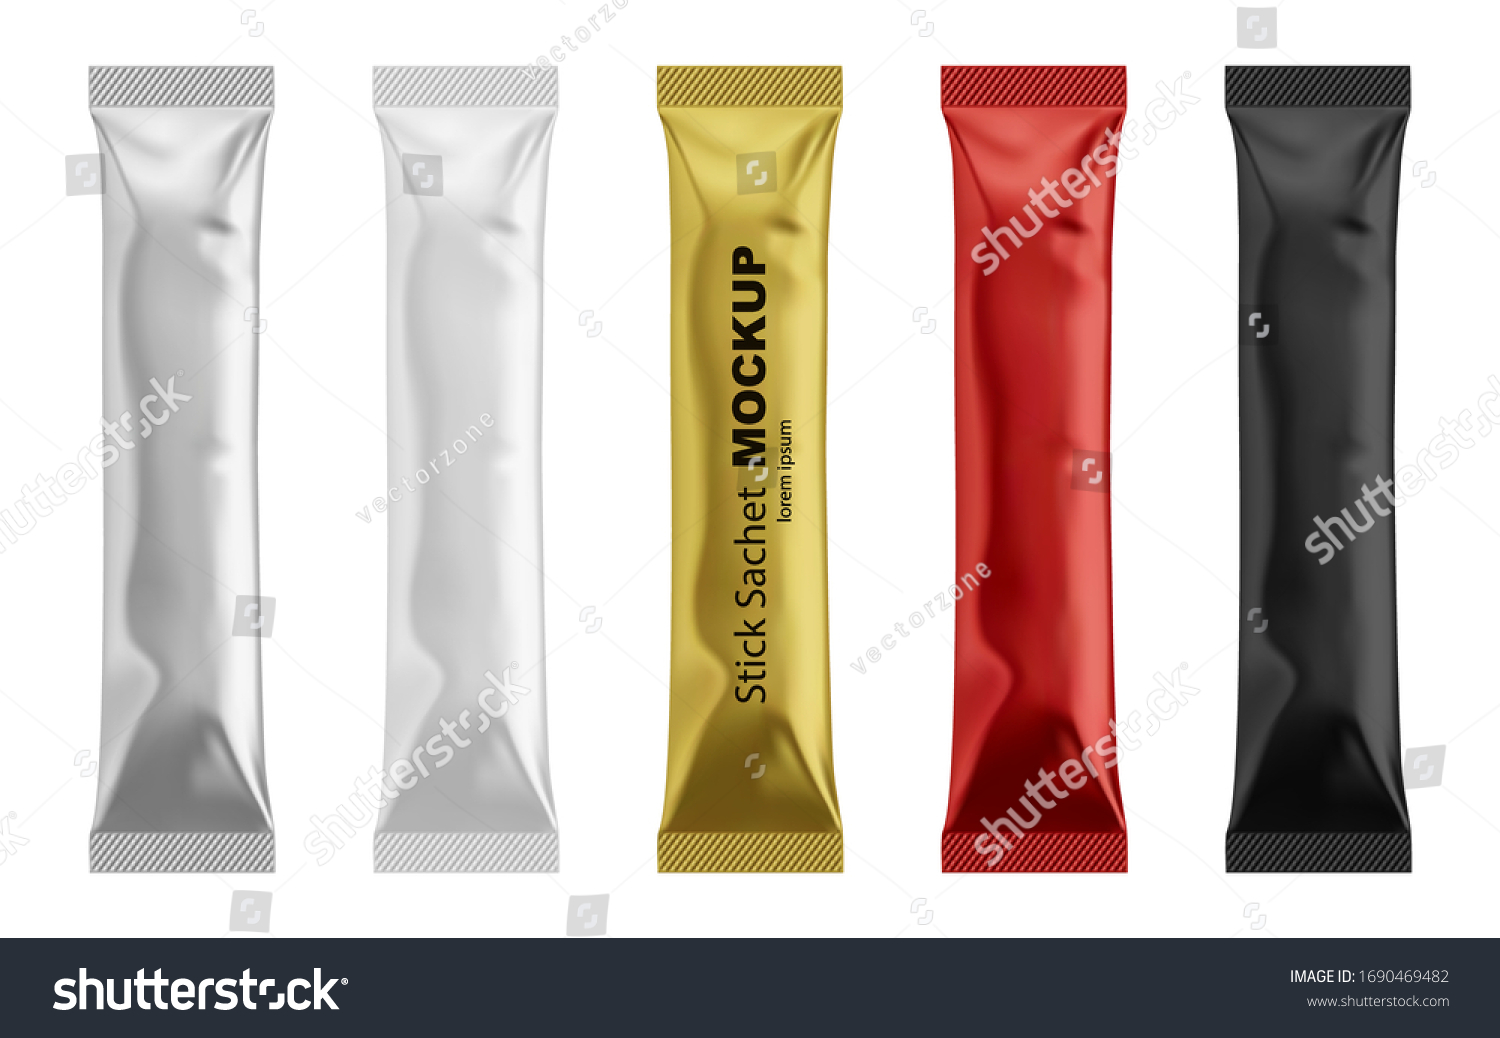 Download Stick Matte Sachet Package Coffee Cacao Stock Vector Royalty Free 1690469482